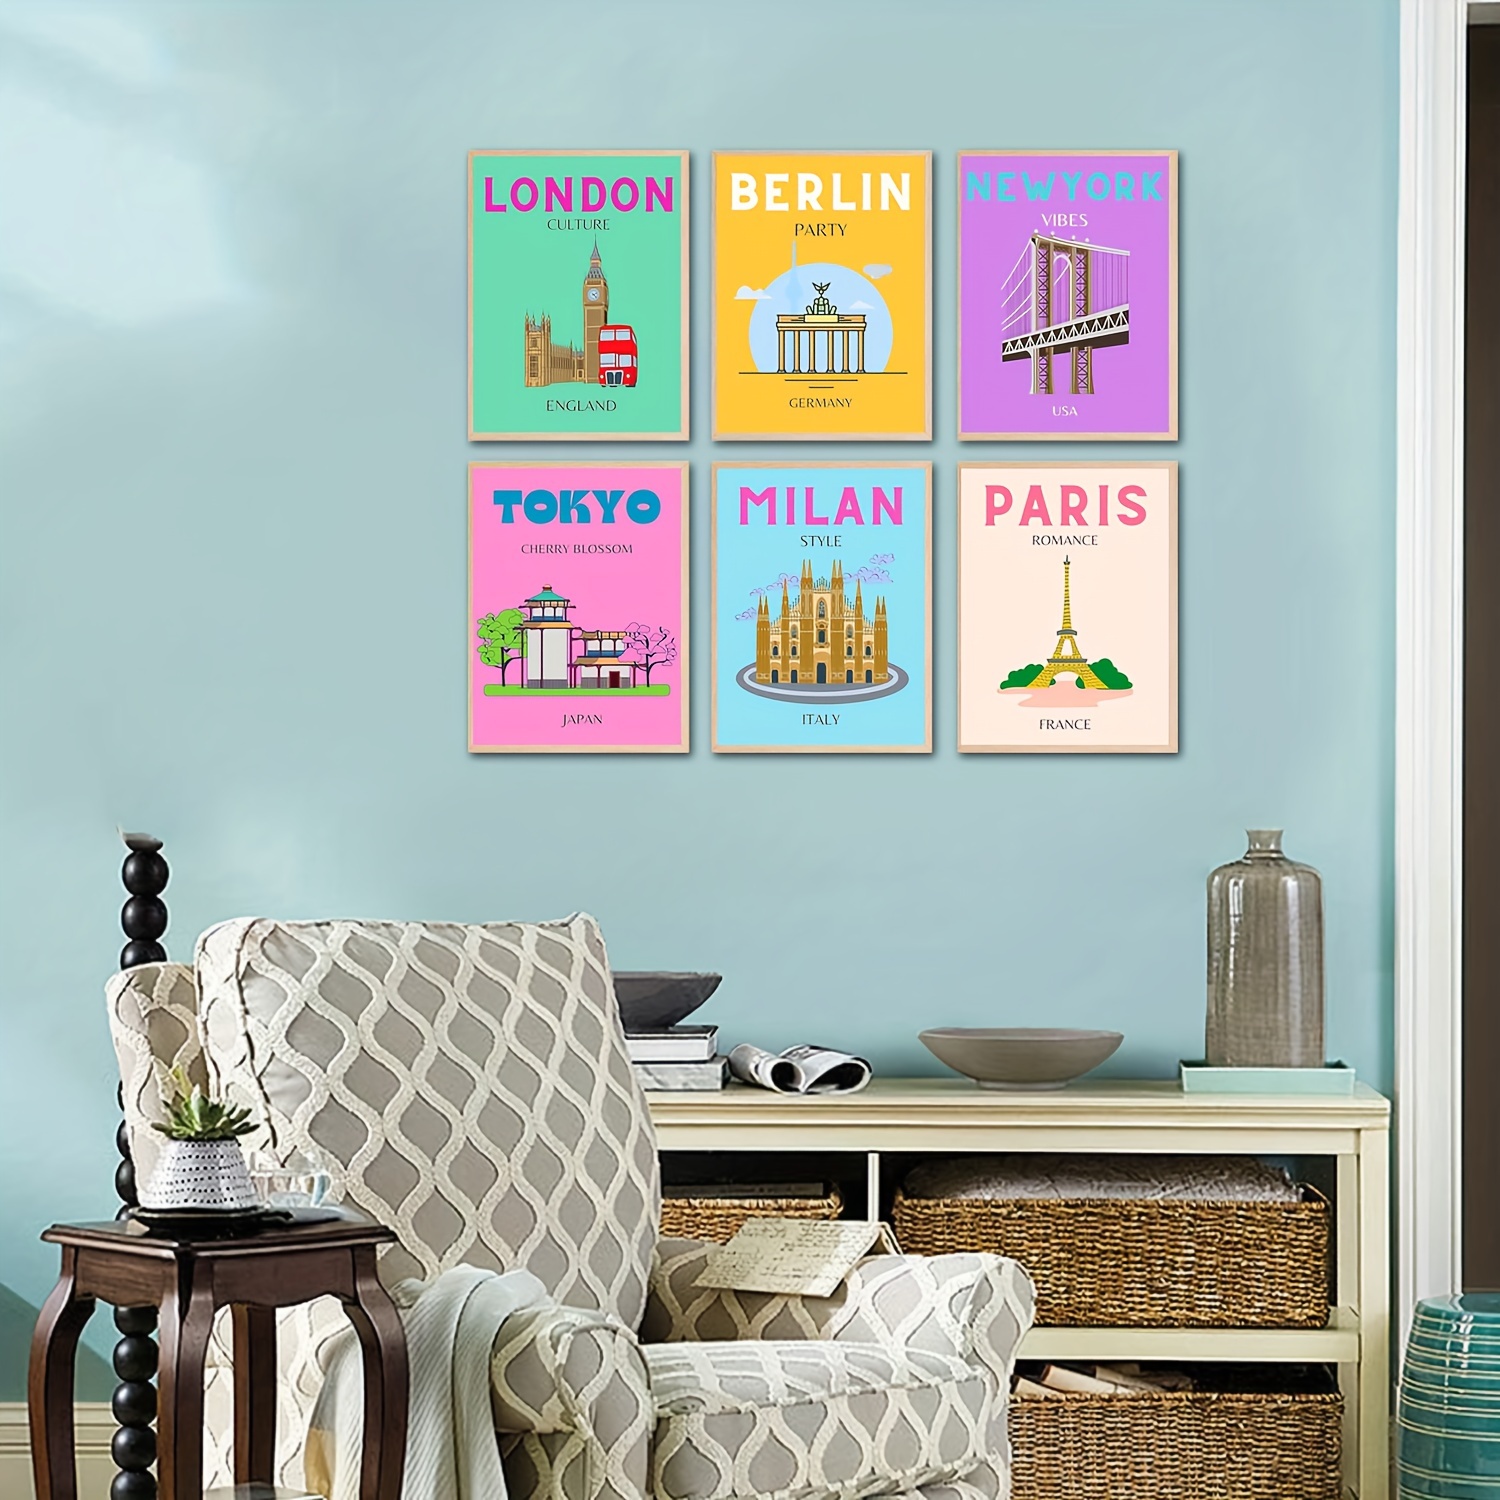 6pcs Preppy Room Decor Aesthetic City Posters Wall Art, Collage For Teenage  Girls Room Bedroom College Dorm Colorful Travel Preppy City Prints, Pictur